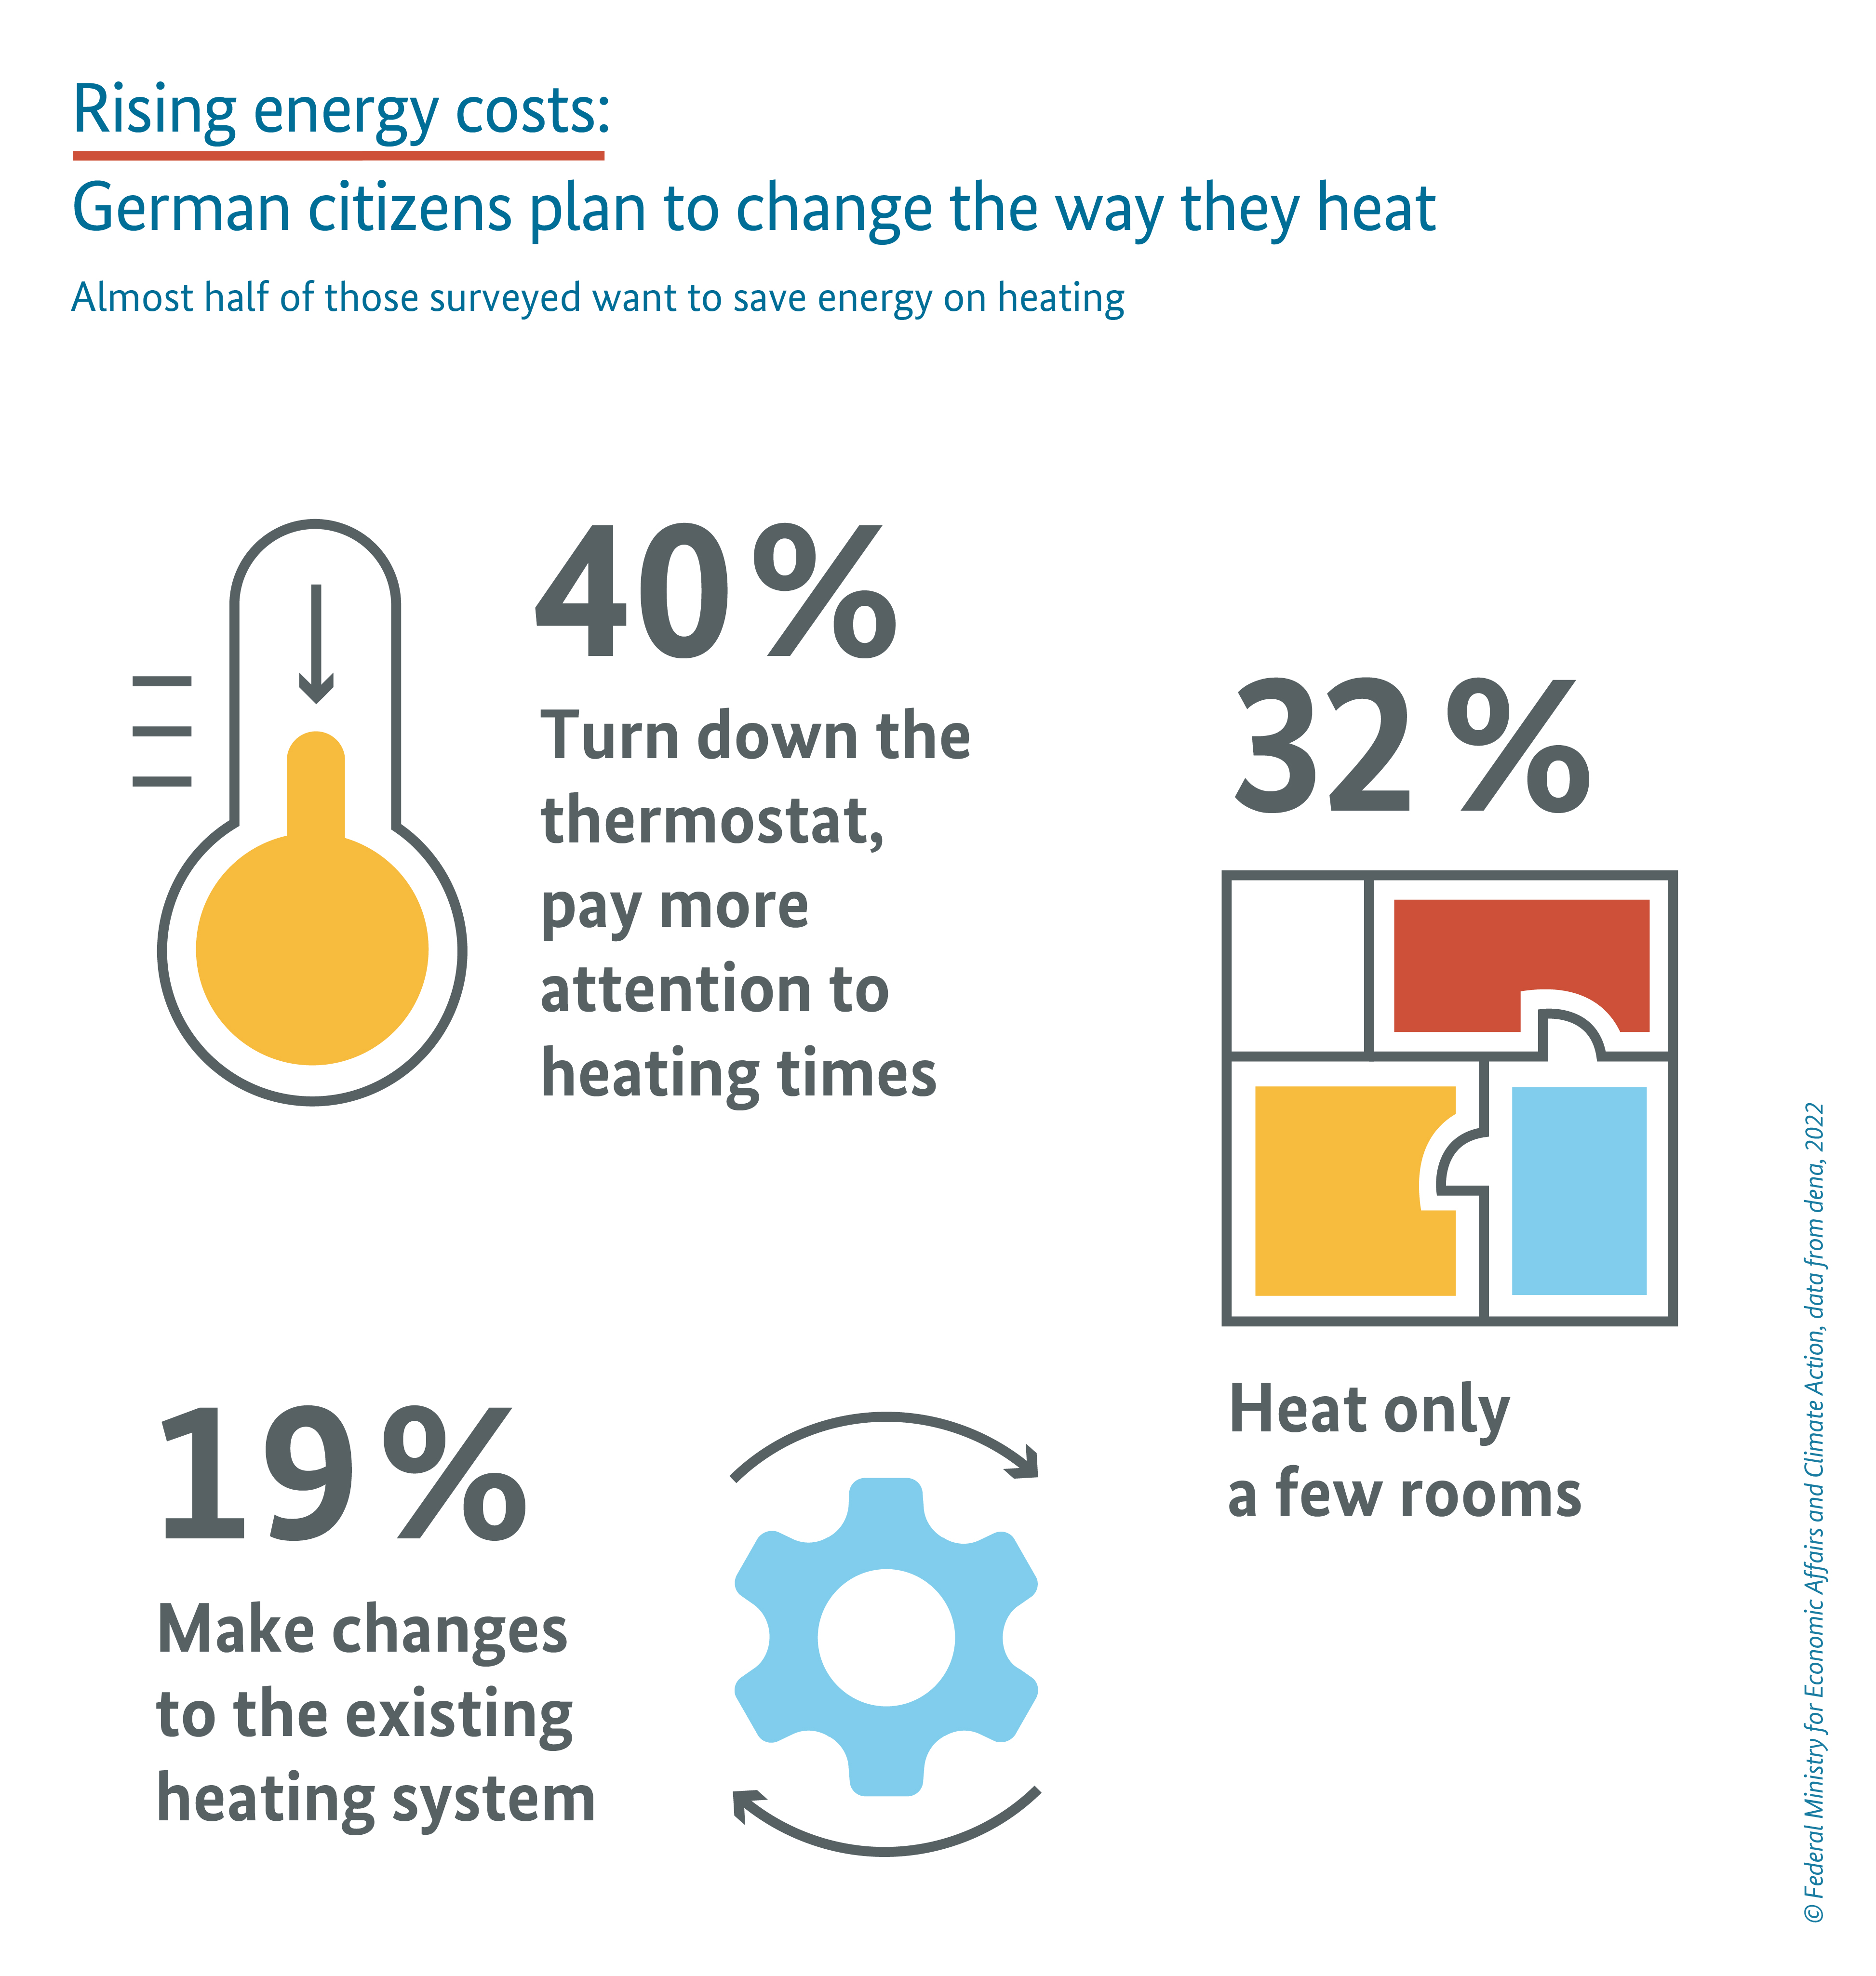 Rising energy costs. Citizens change their heating behaviour.